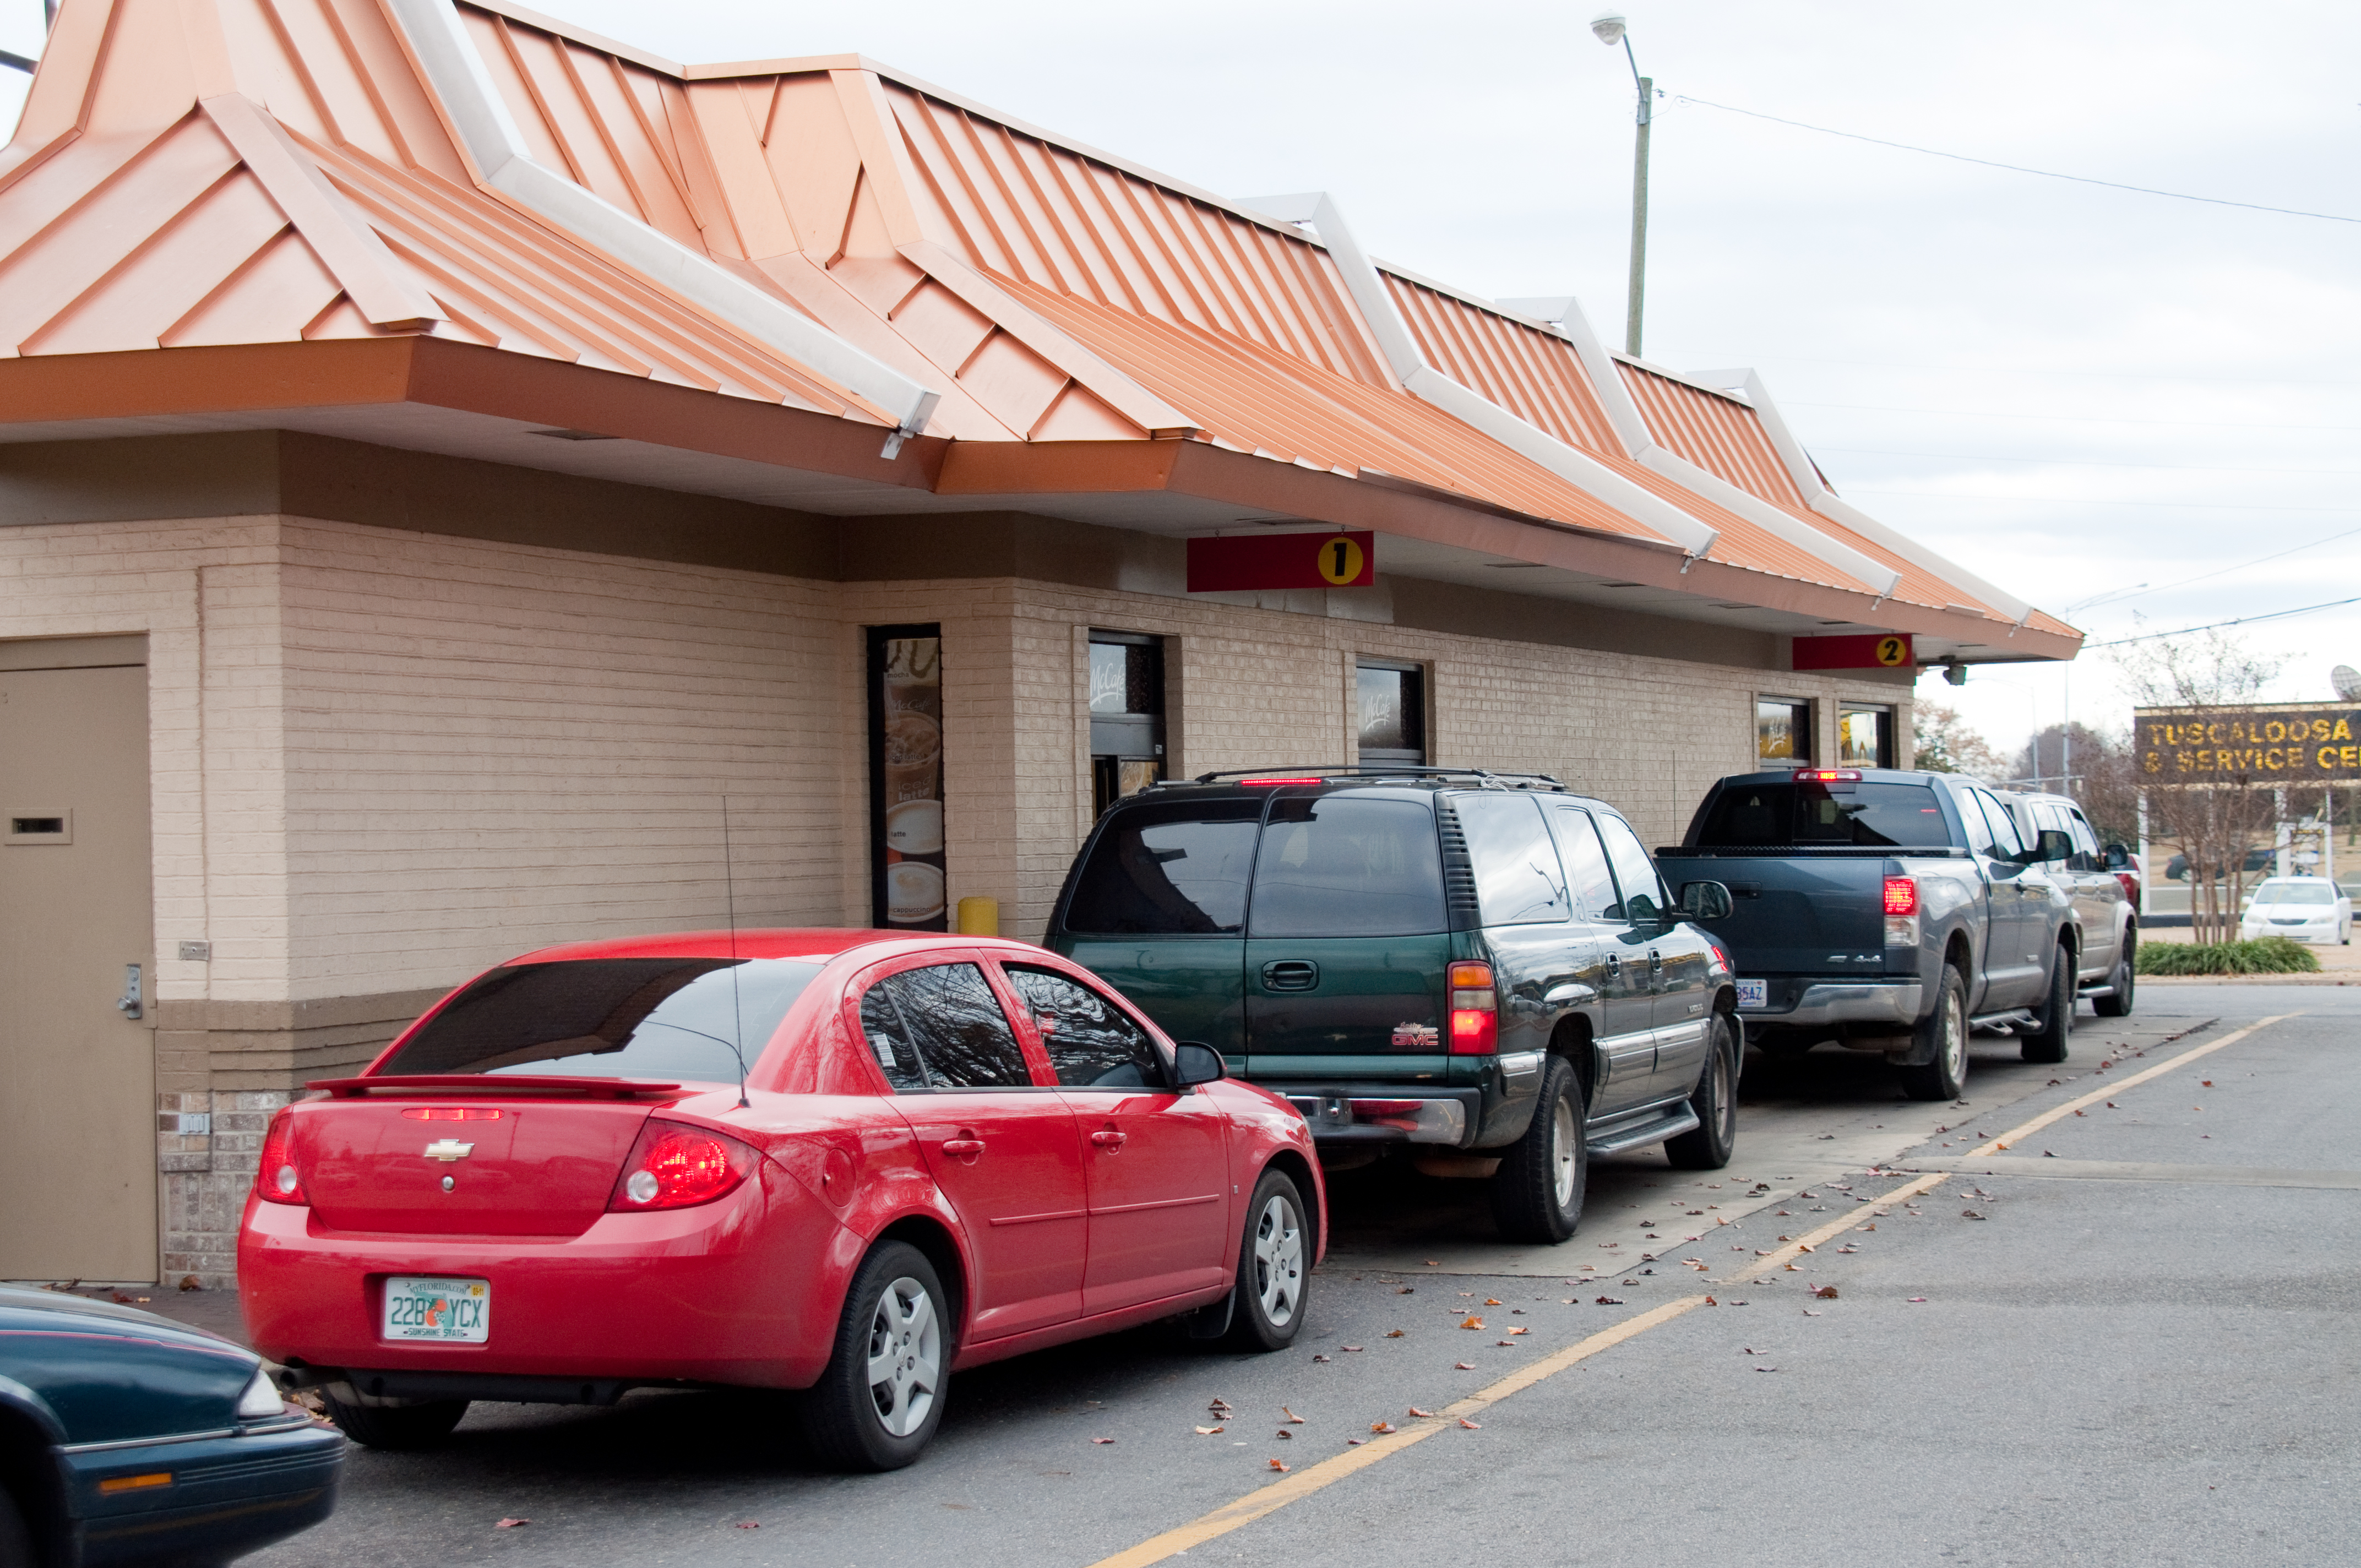 Fast Food Drive-Thrus Actually ARE Getting Slower and Sloppier